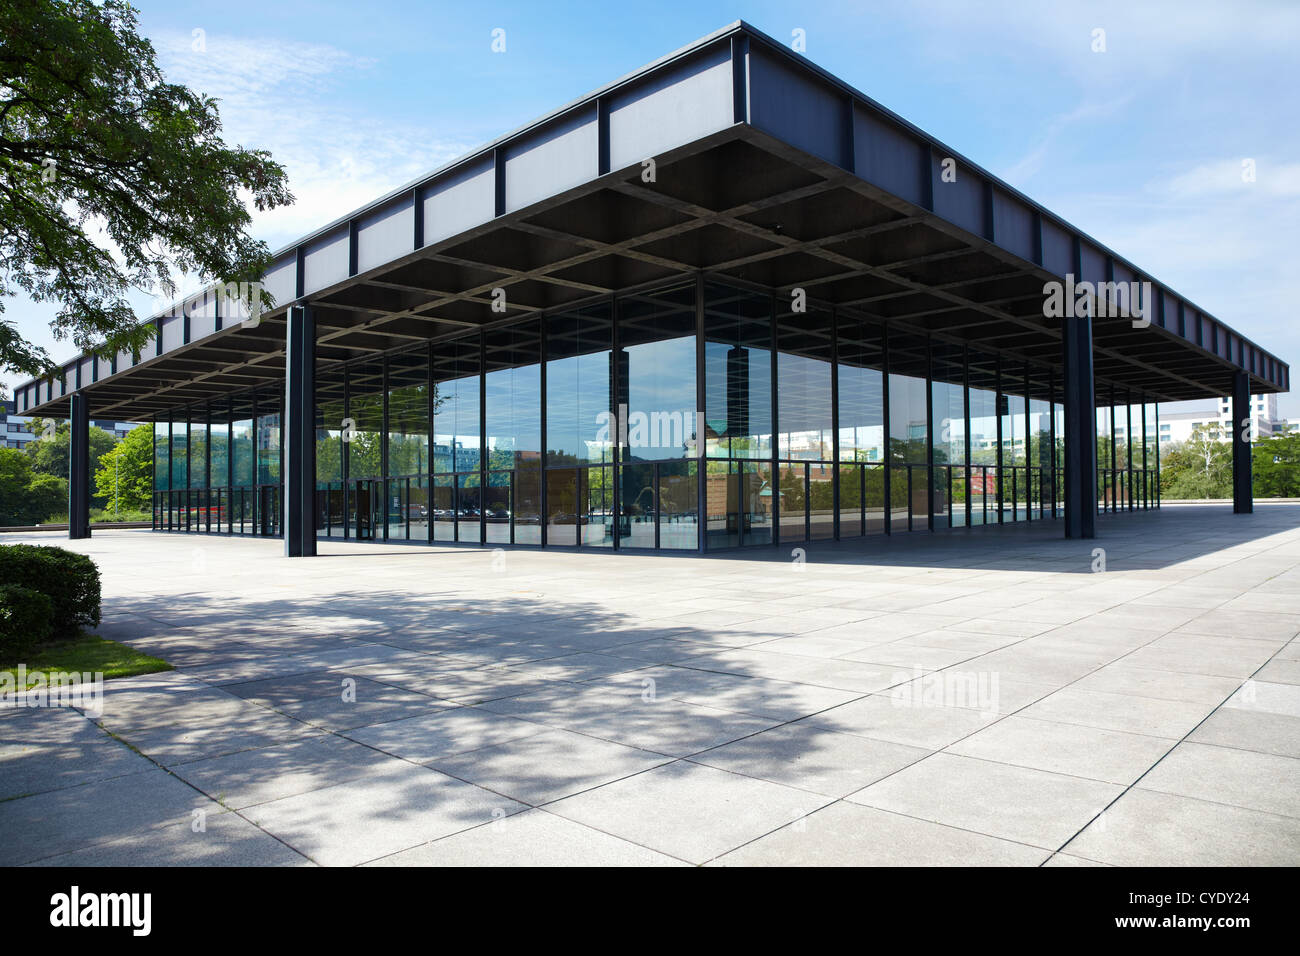 Neue Nationalgalerie,New National Gallery in Berlin designed by architect Ludwig Mies van der Rohe in 1968 Stock Photo